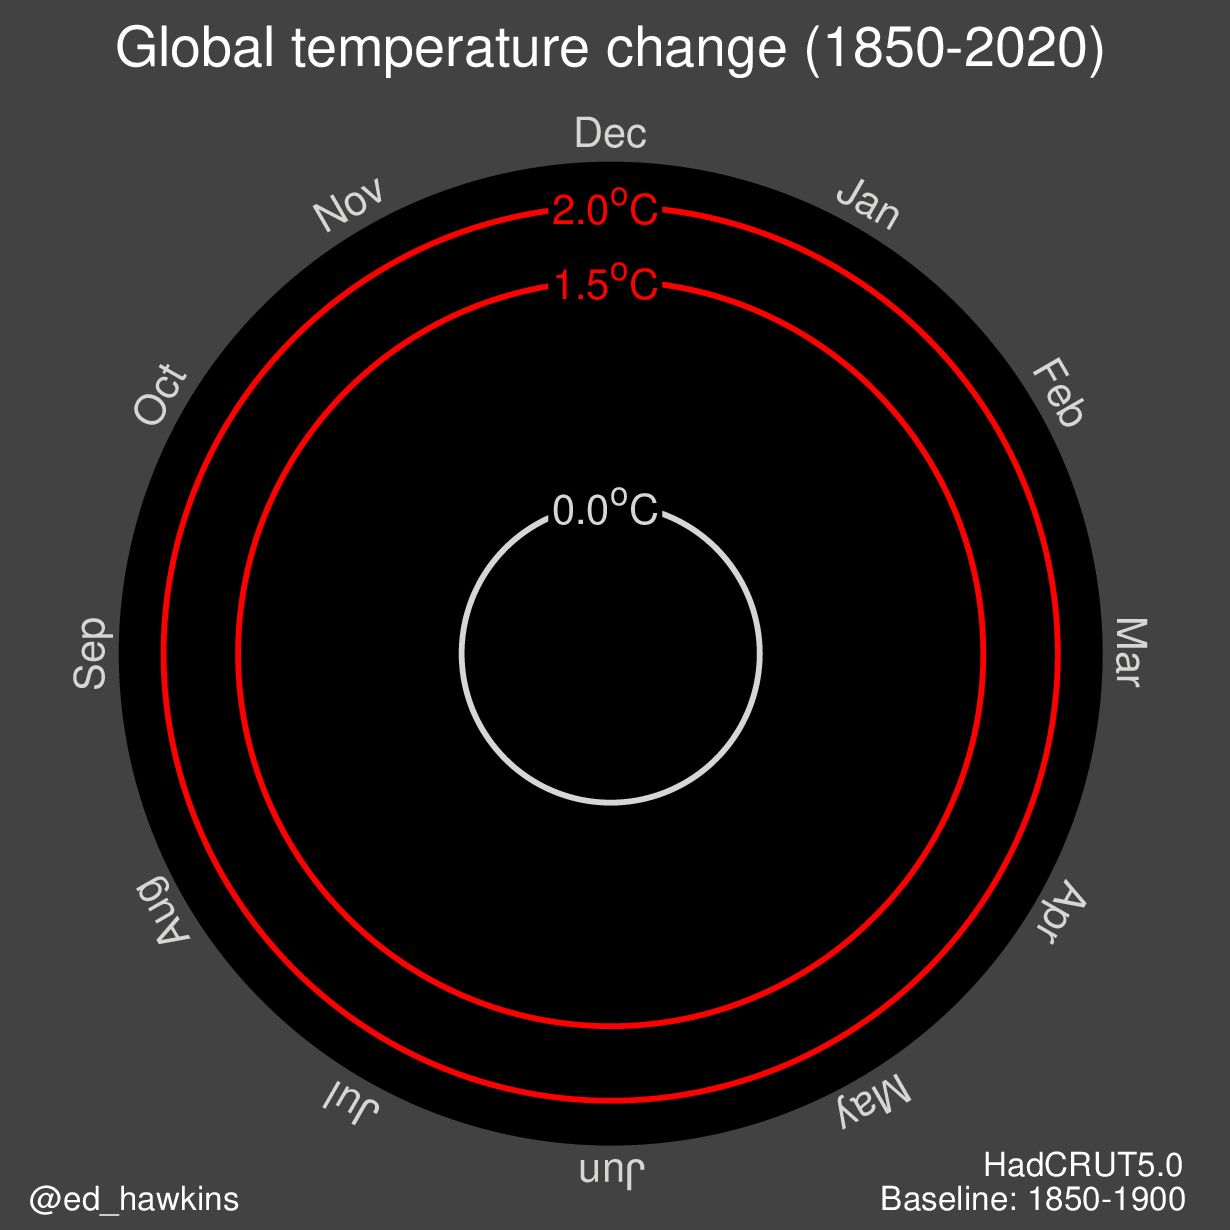 Mapping global temperature changes: every year from 1850 to 2016